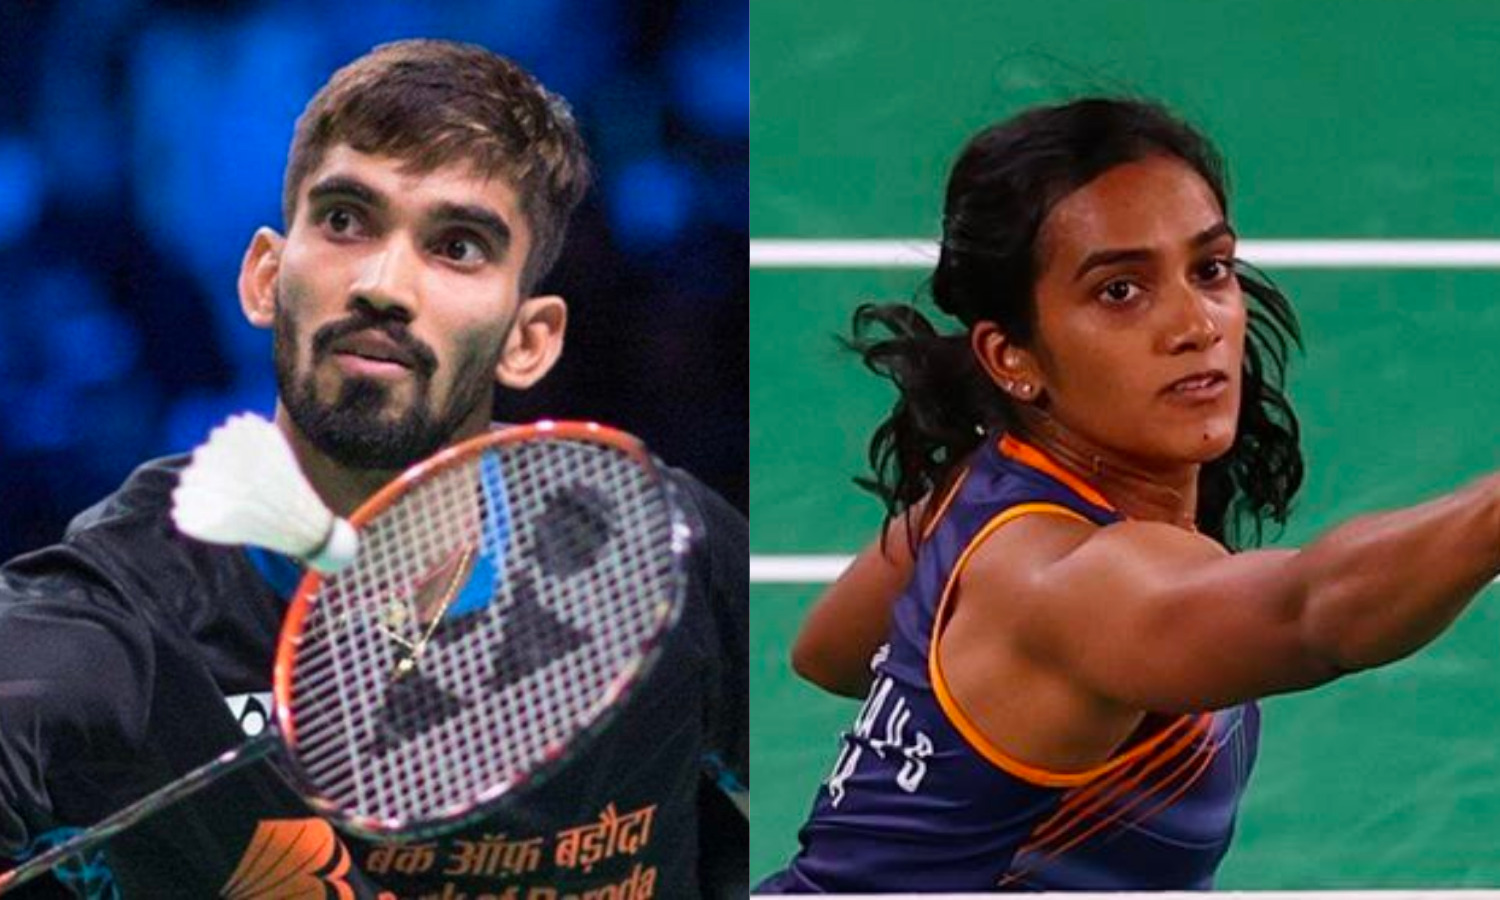 Thailand Open 2022 Preview, India Squad, Schedule, Where to Watch, Live Stream